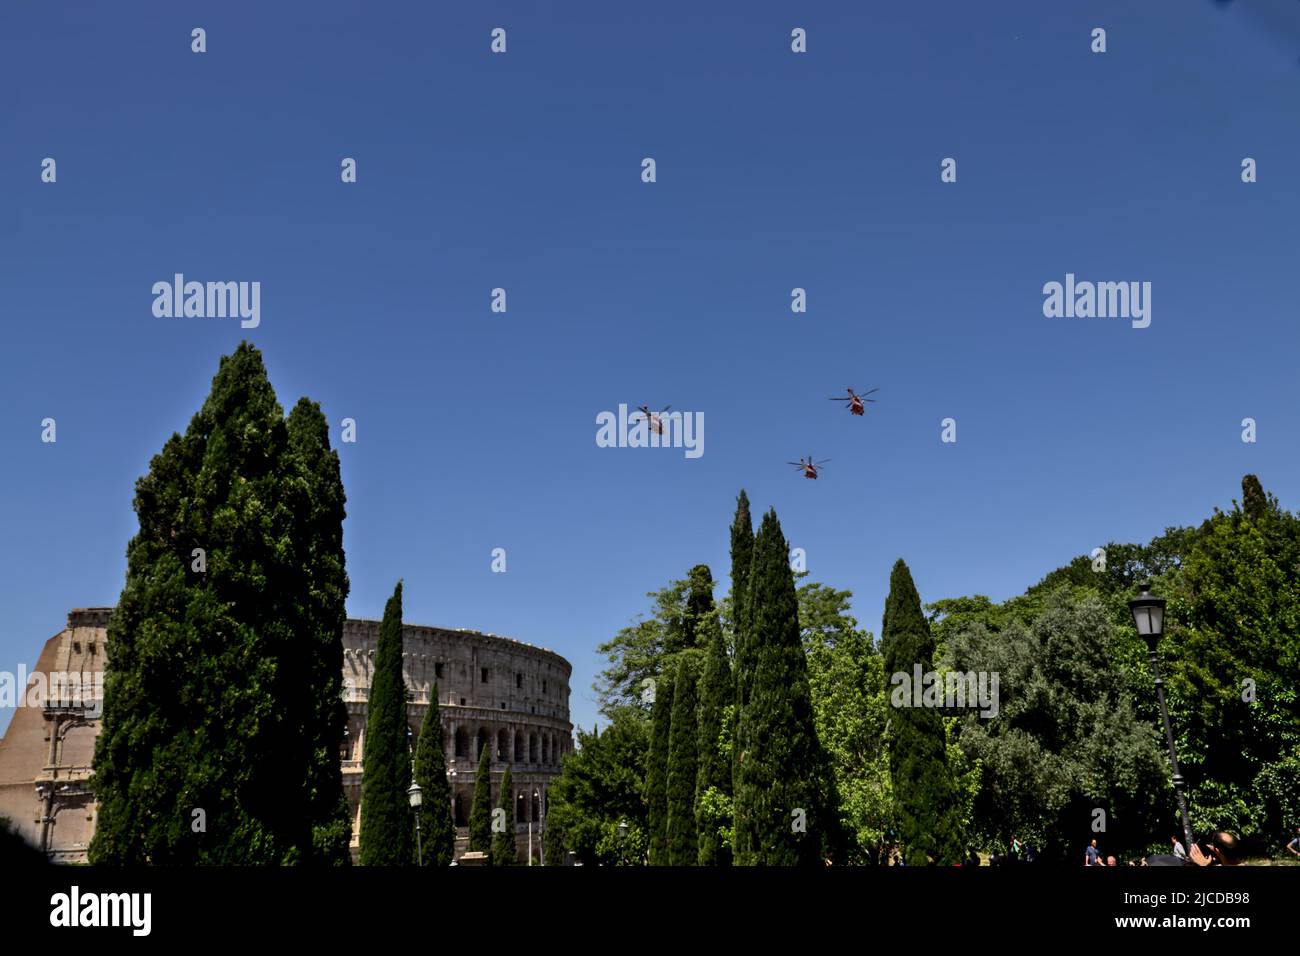 Italian military parade on 2 June. Group of helicopters flies over the Colosseum. Stock Photo